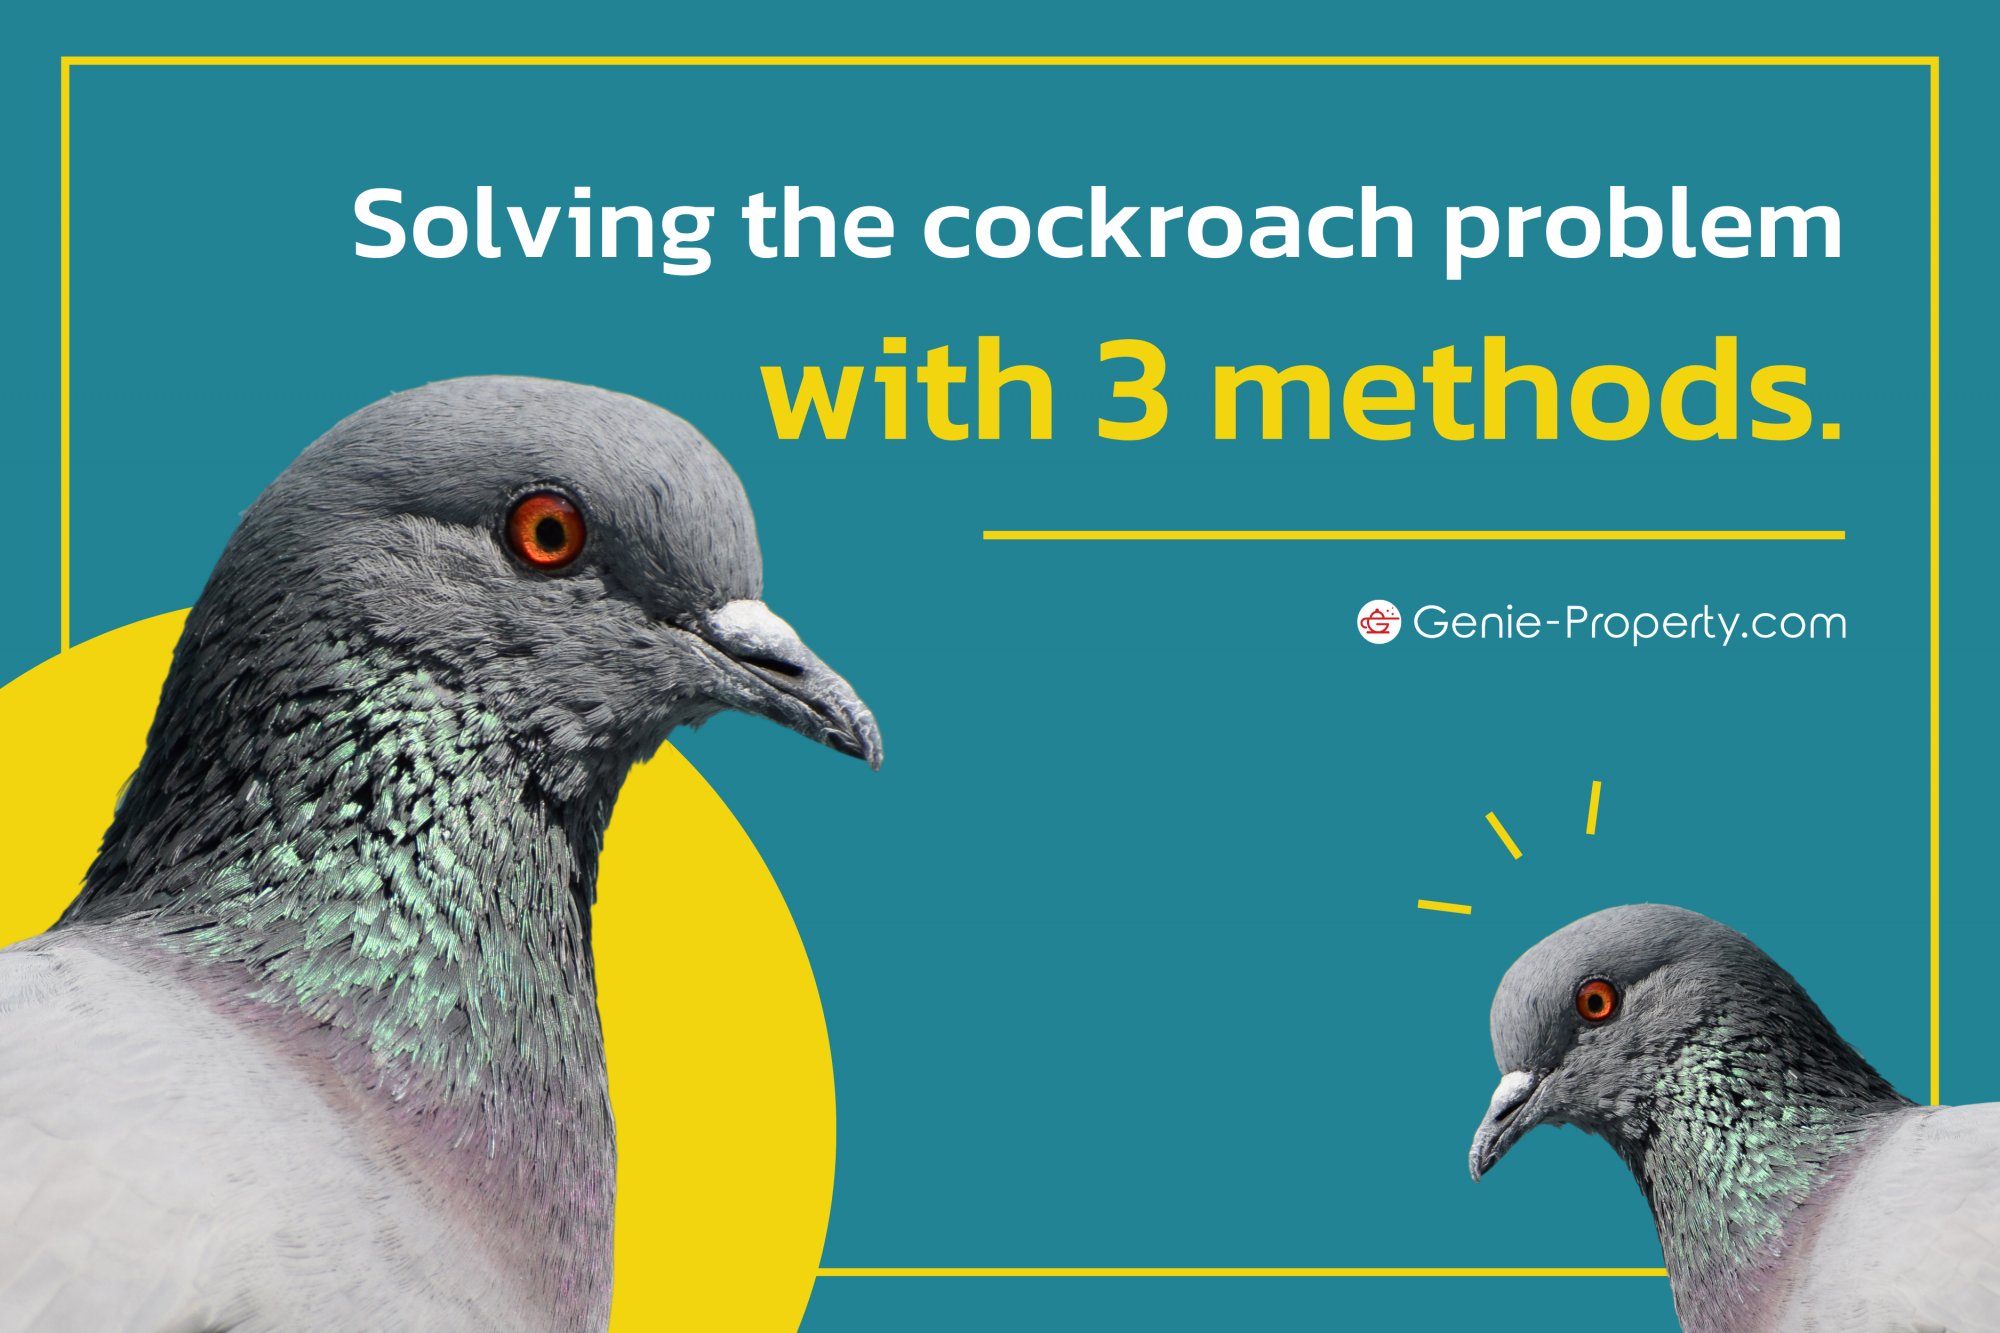 image for Solving the cockroach problem with 3 methods.